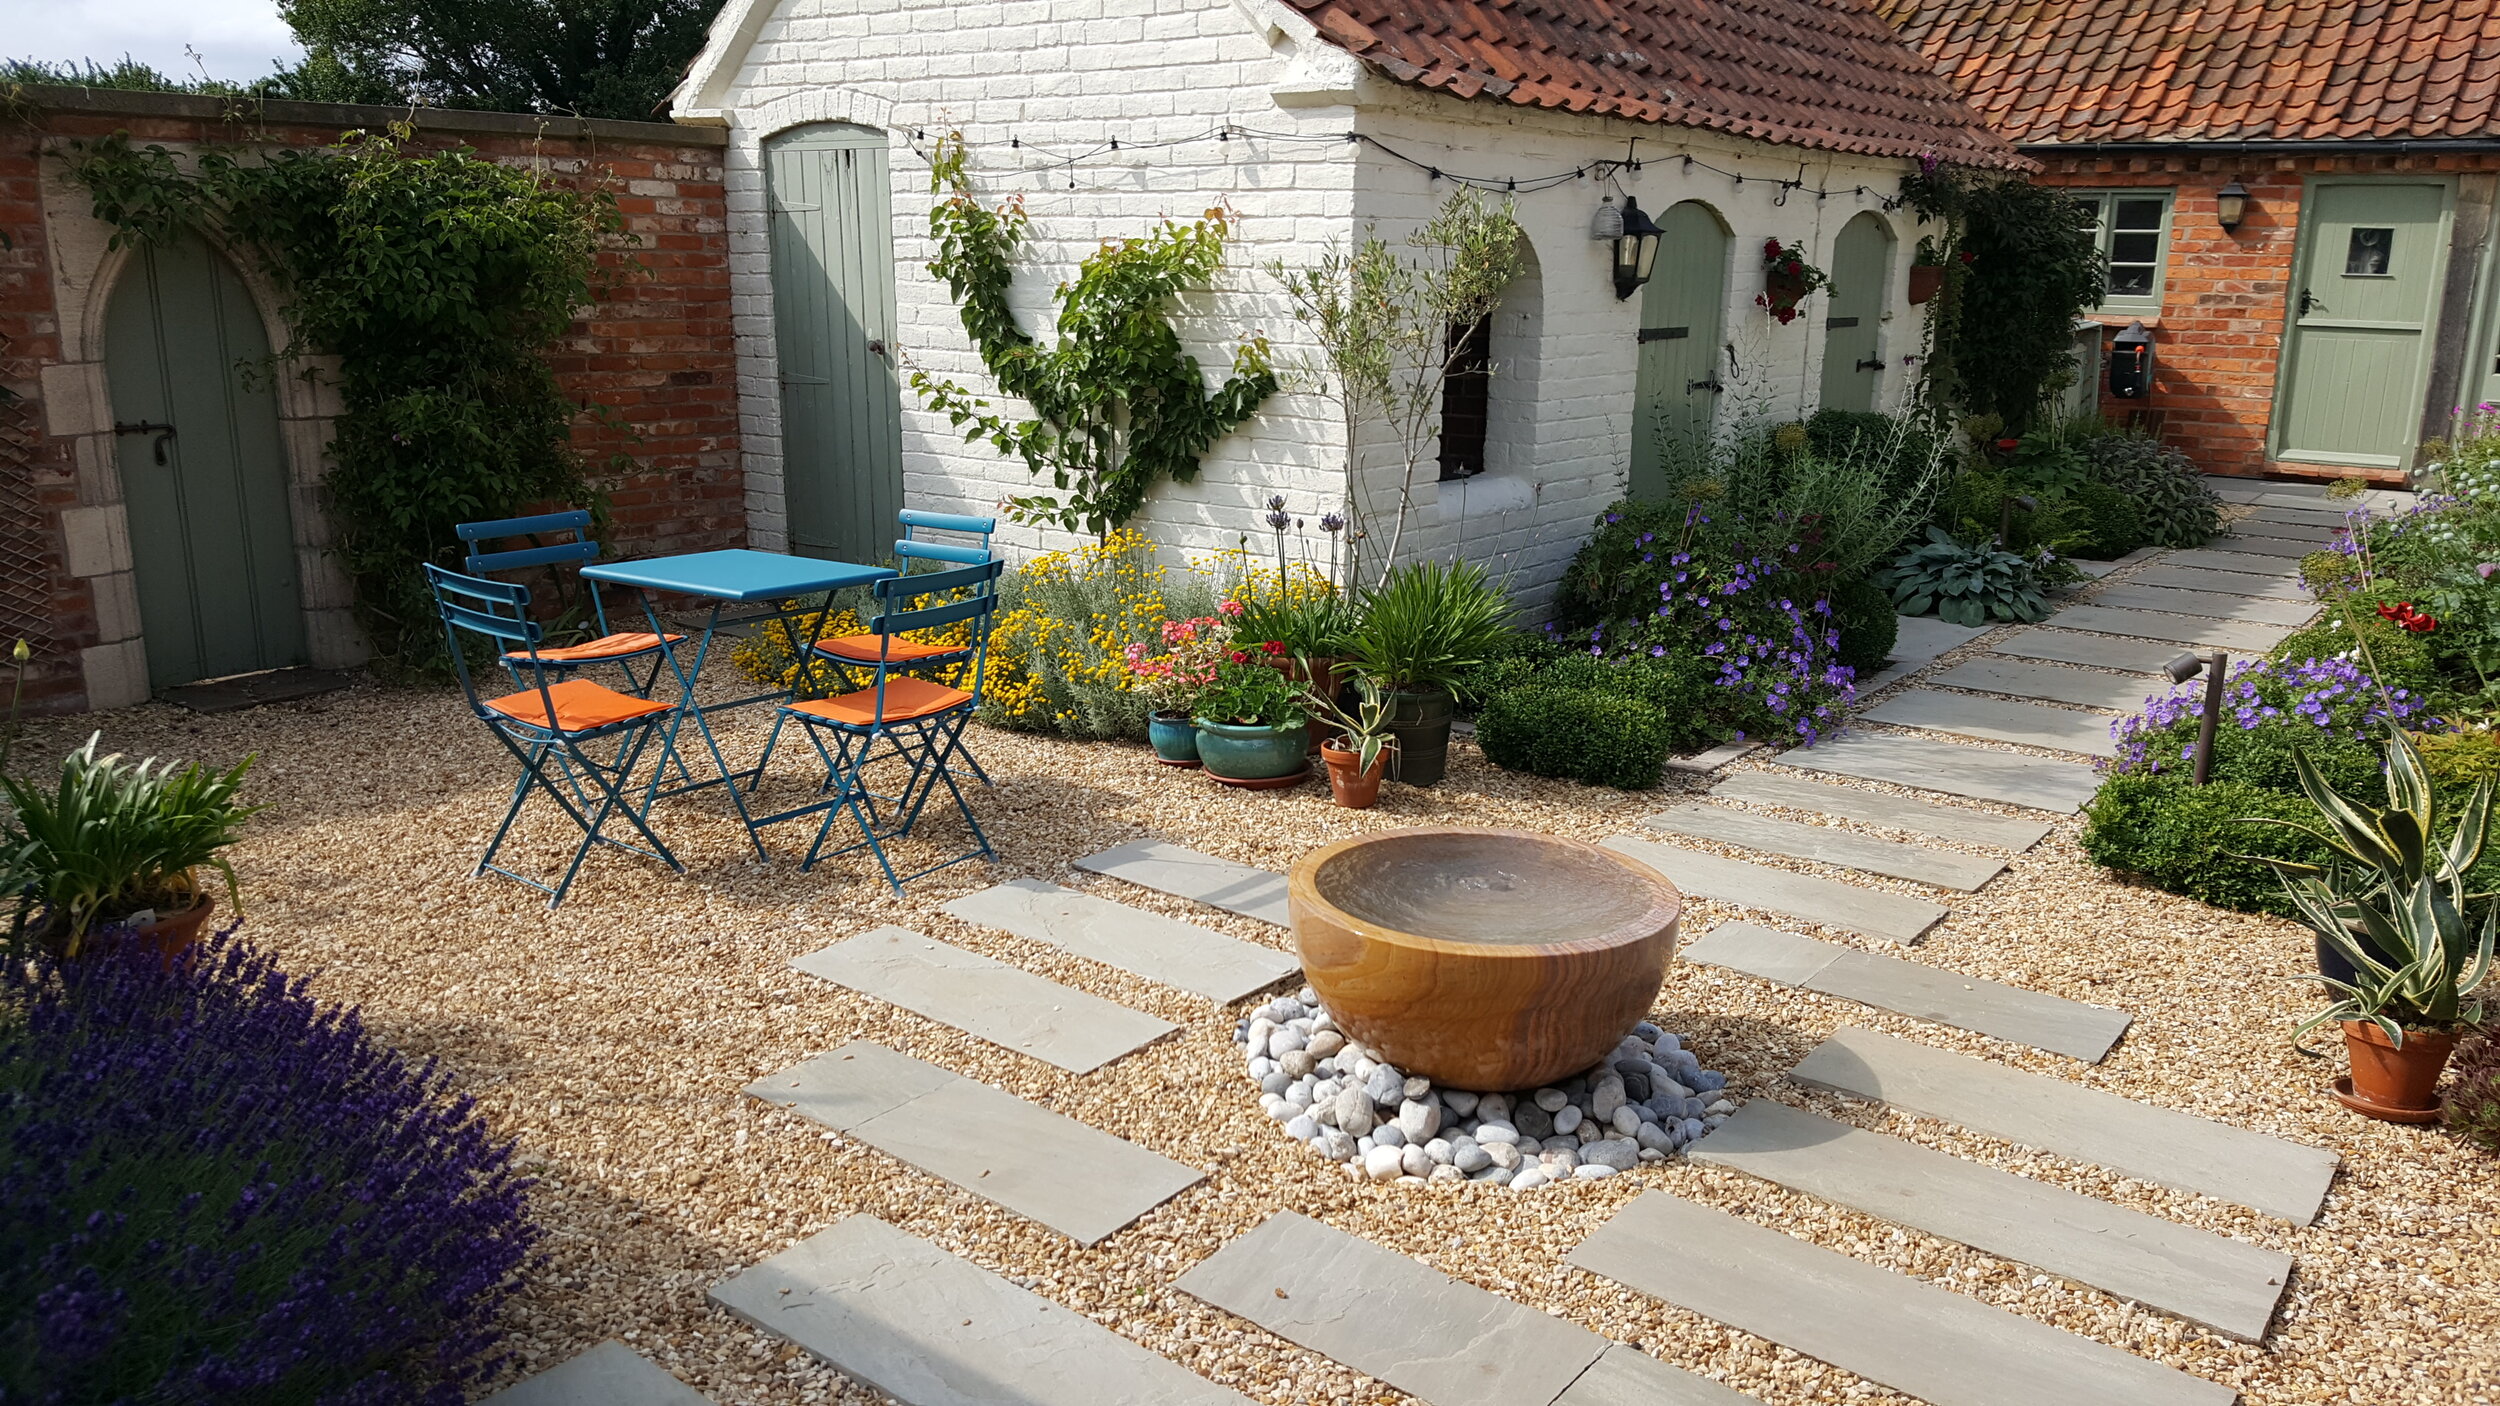 3 Garden design Lincolnshire - stepping stones gravel courtyard water feature and garden table.jpg